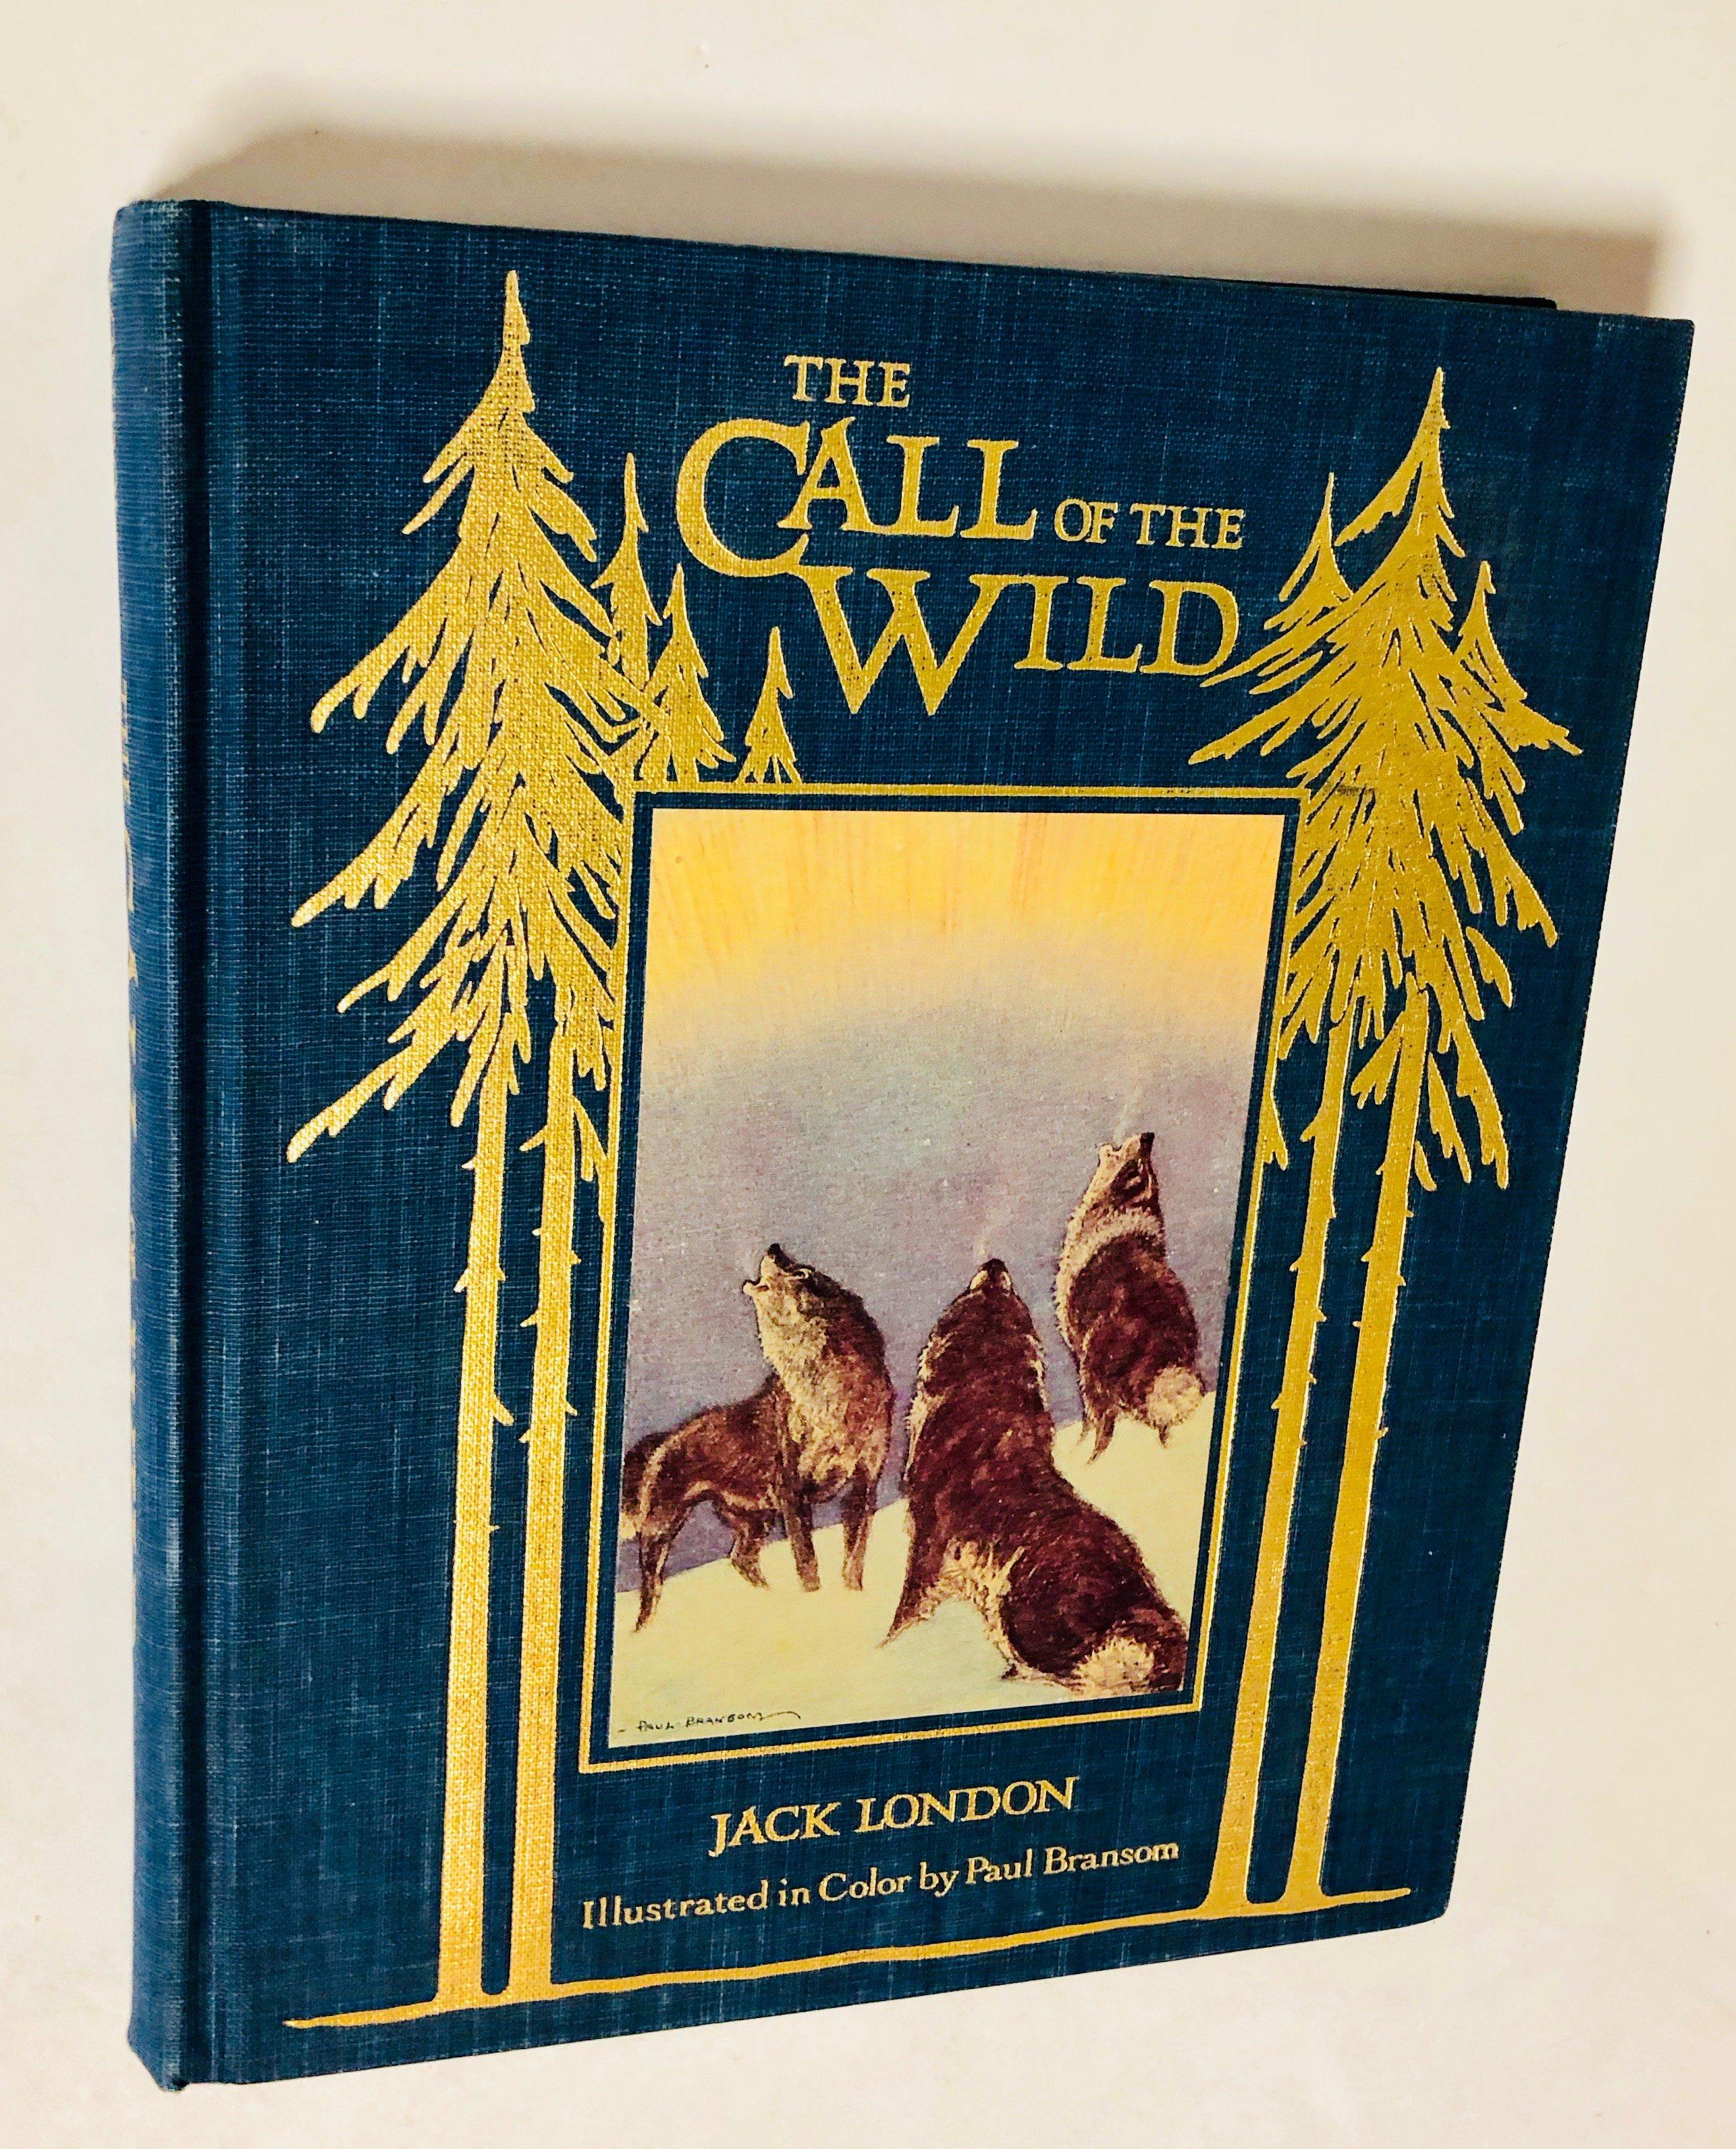 TWO COPIES of Call of the Wild by Jack London - Portland Illustrated Classics - MacMillan (1945)